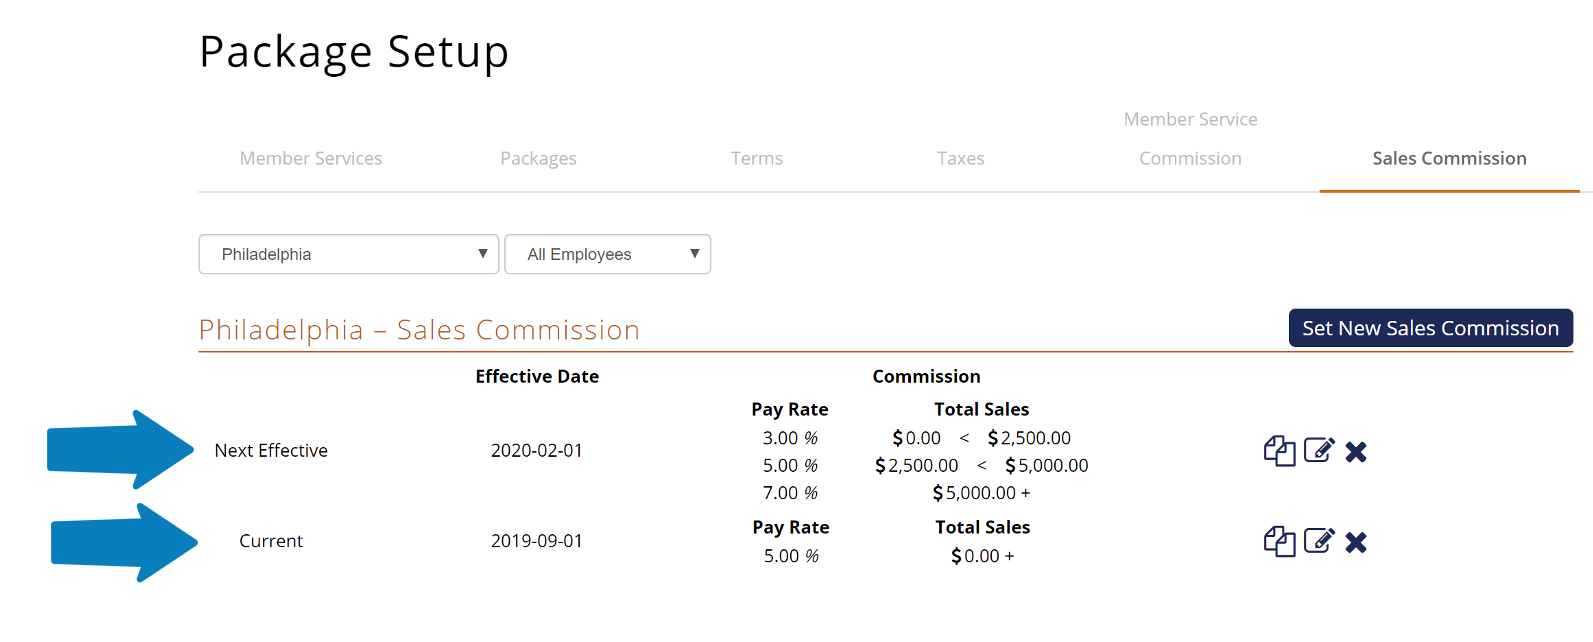 Sales Commission Tab in Package Setup